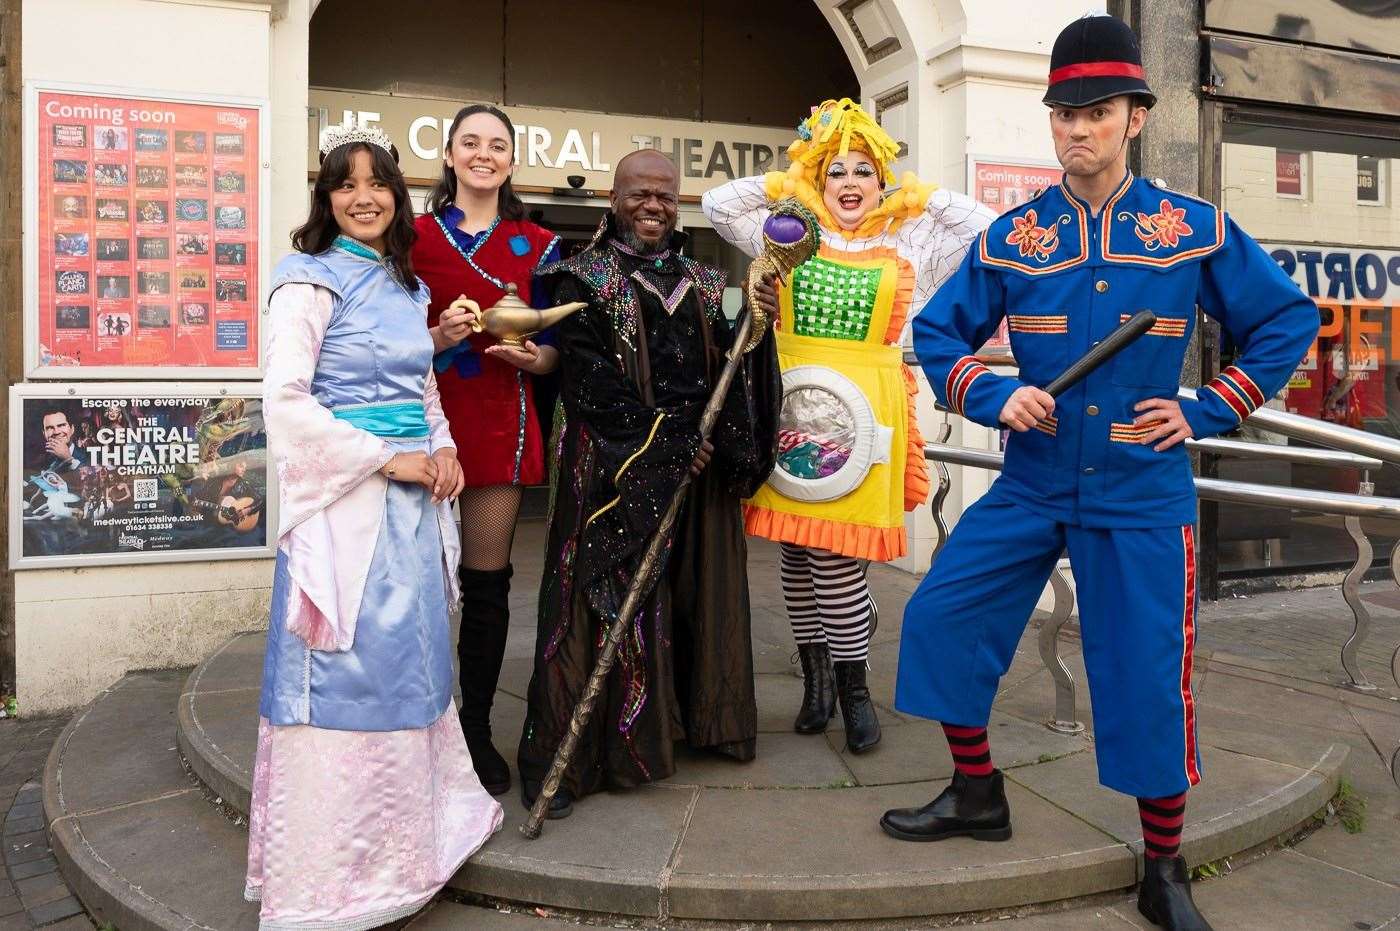 Aladdin is coming to Chatham’s Central Theatre this Christmas for its panto production. Picture: Jordan Productions